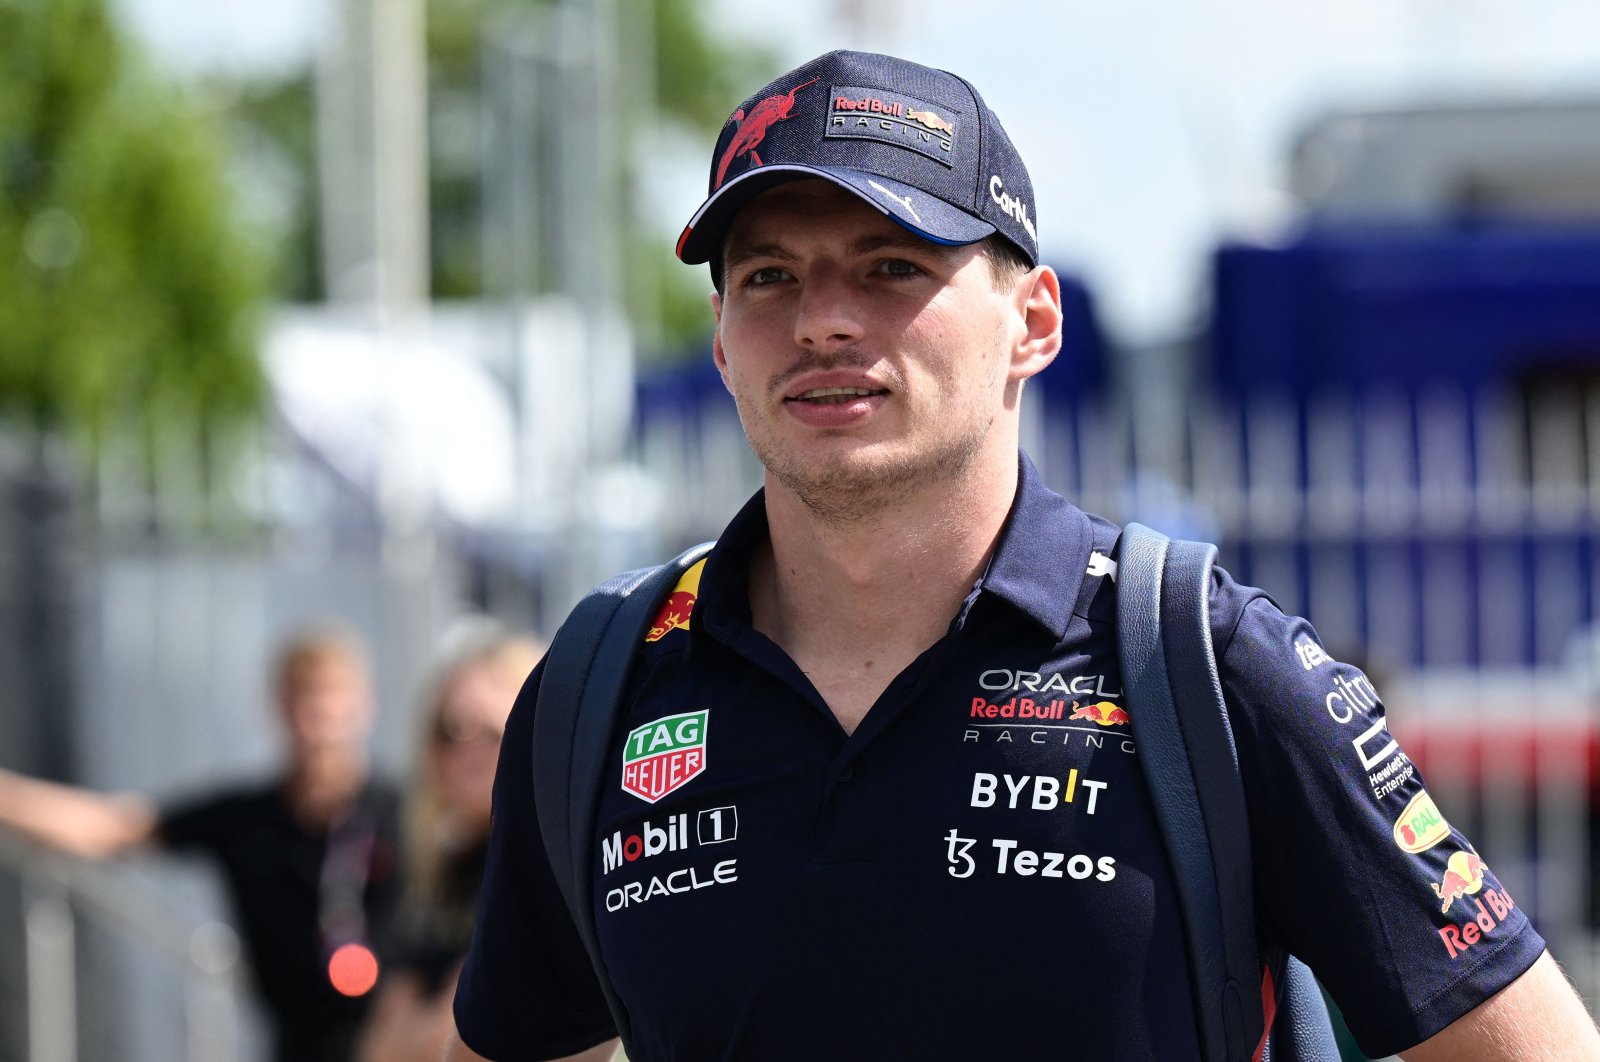 Red Bull Racing's Dutch driver Max Verstappen arrives in Monza, Italy, Sept. 8, 2022 (AFP Photo)